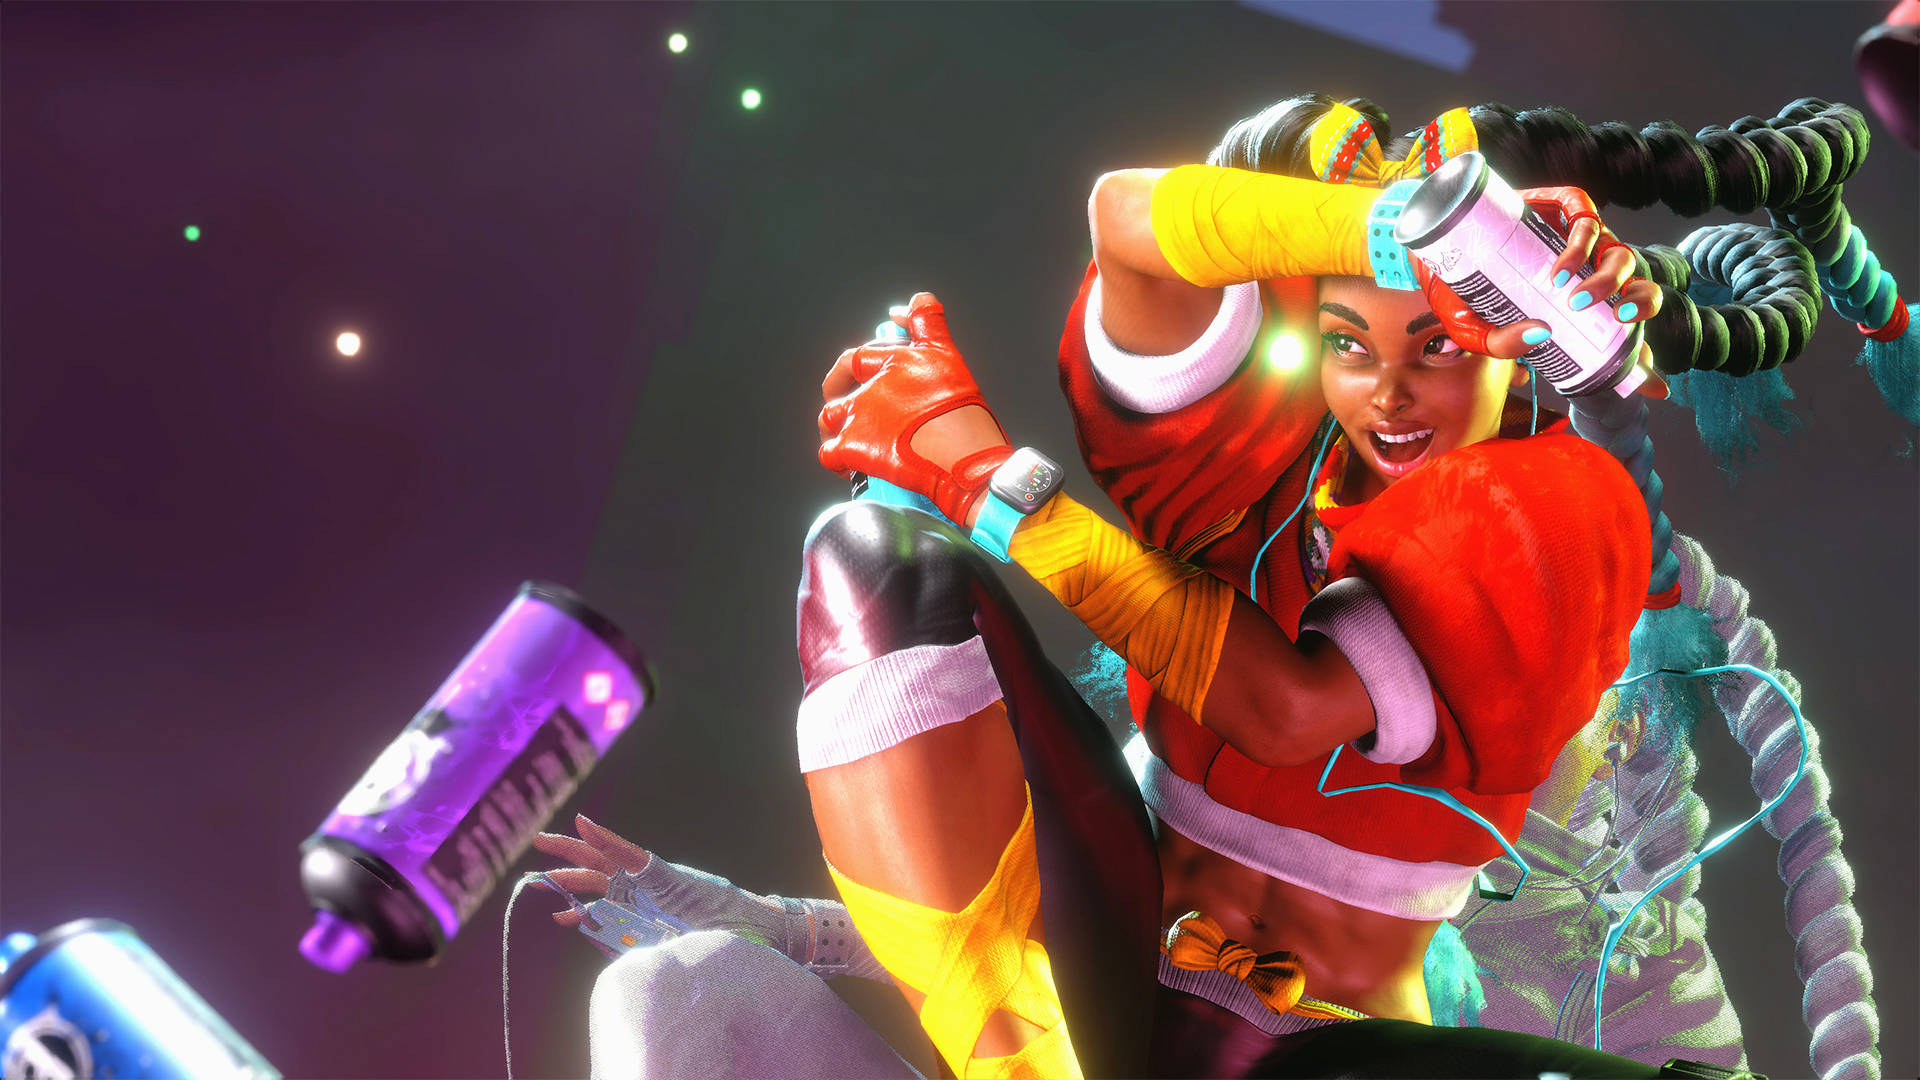 The worst character introduced in every Street Fighter game